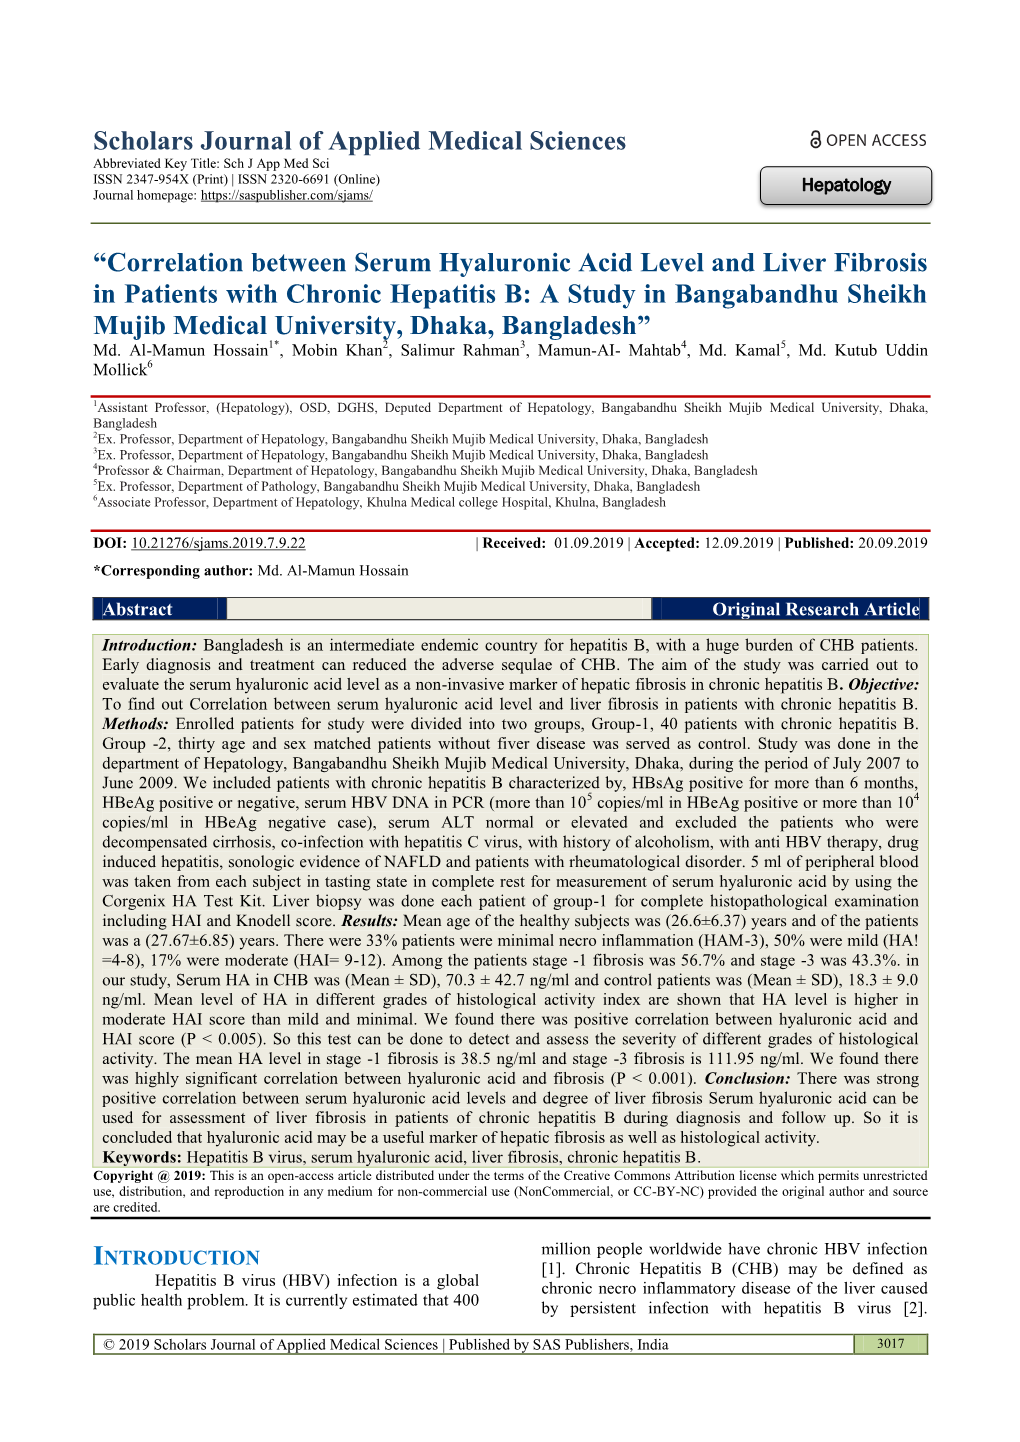 Correlation Between Serum Hyaluronic Acid Level and Liver Fibrosis in Patients W